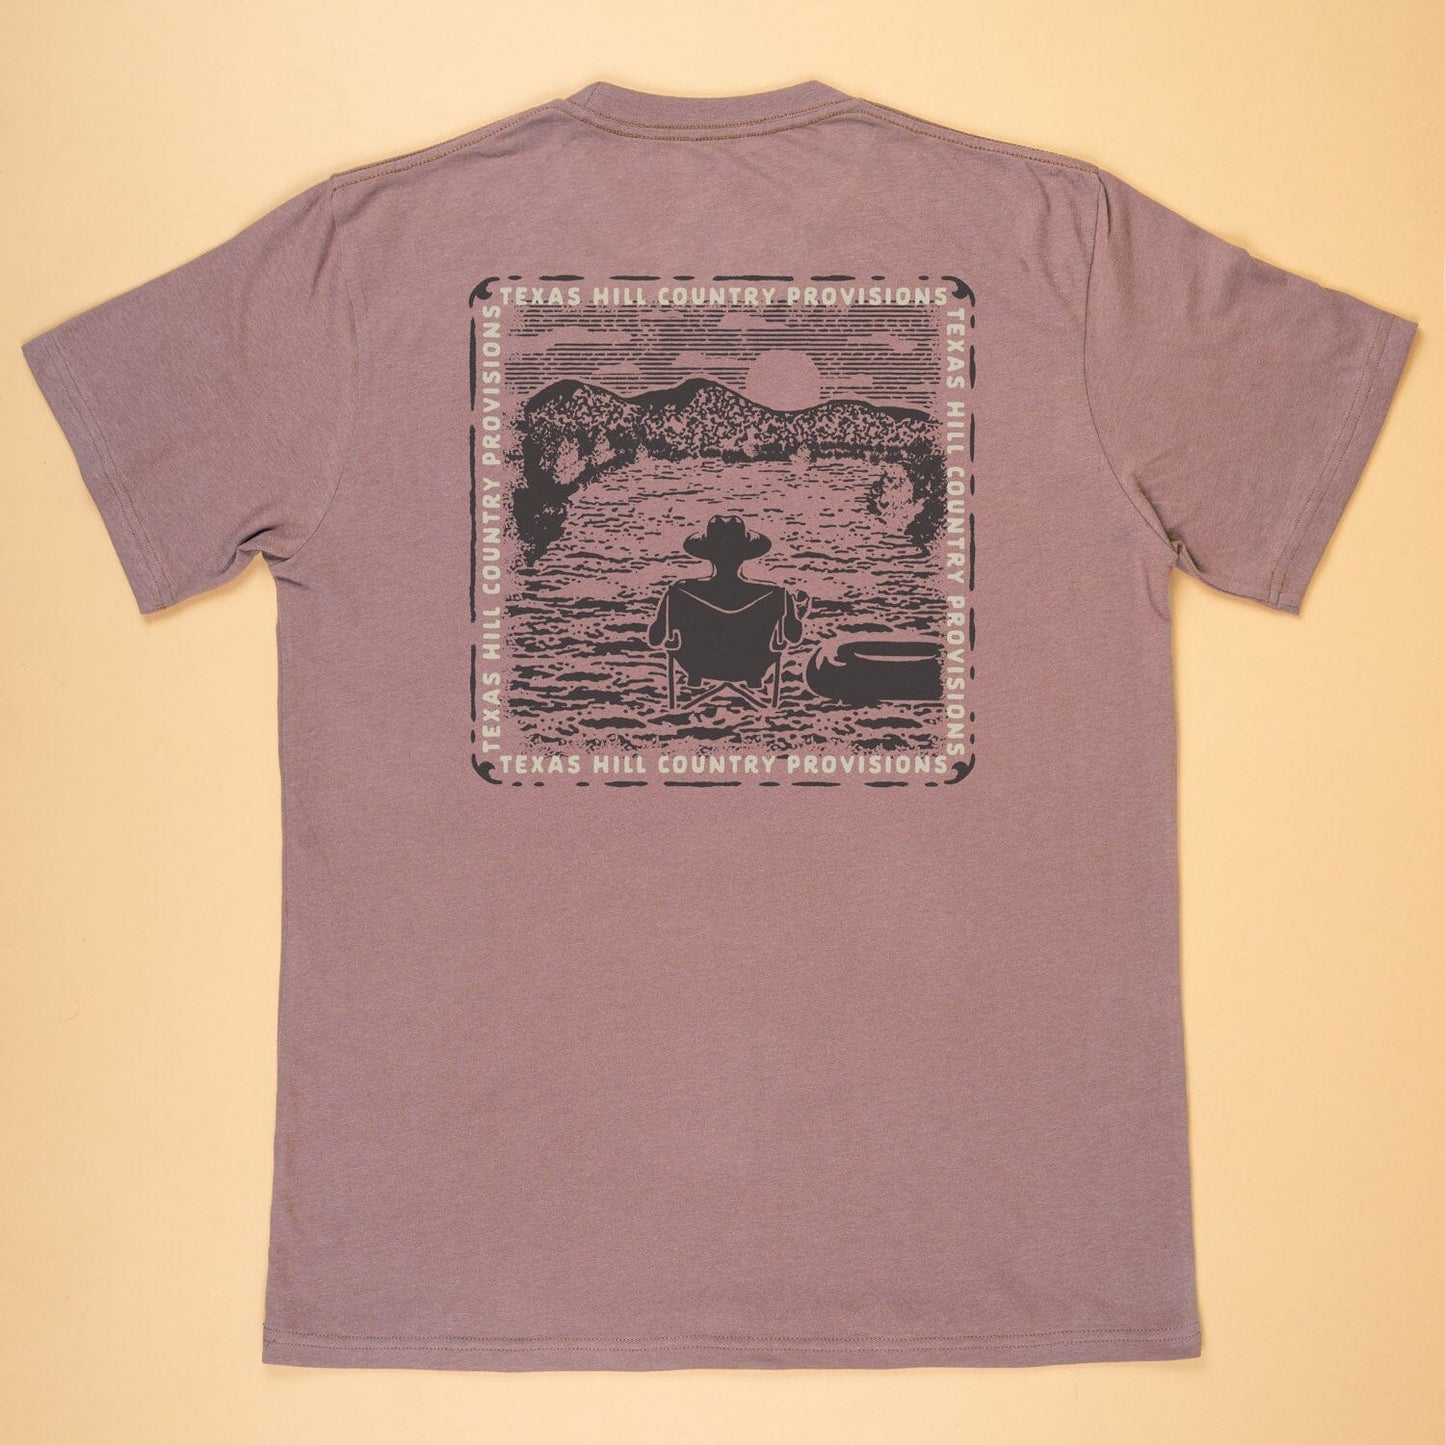 Fine n' Dandy Feather Grass Tee Texas Hill Country Provisions Purple Haze S 